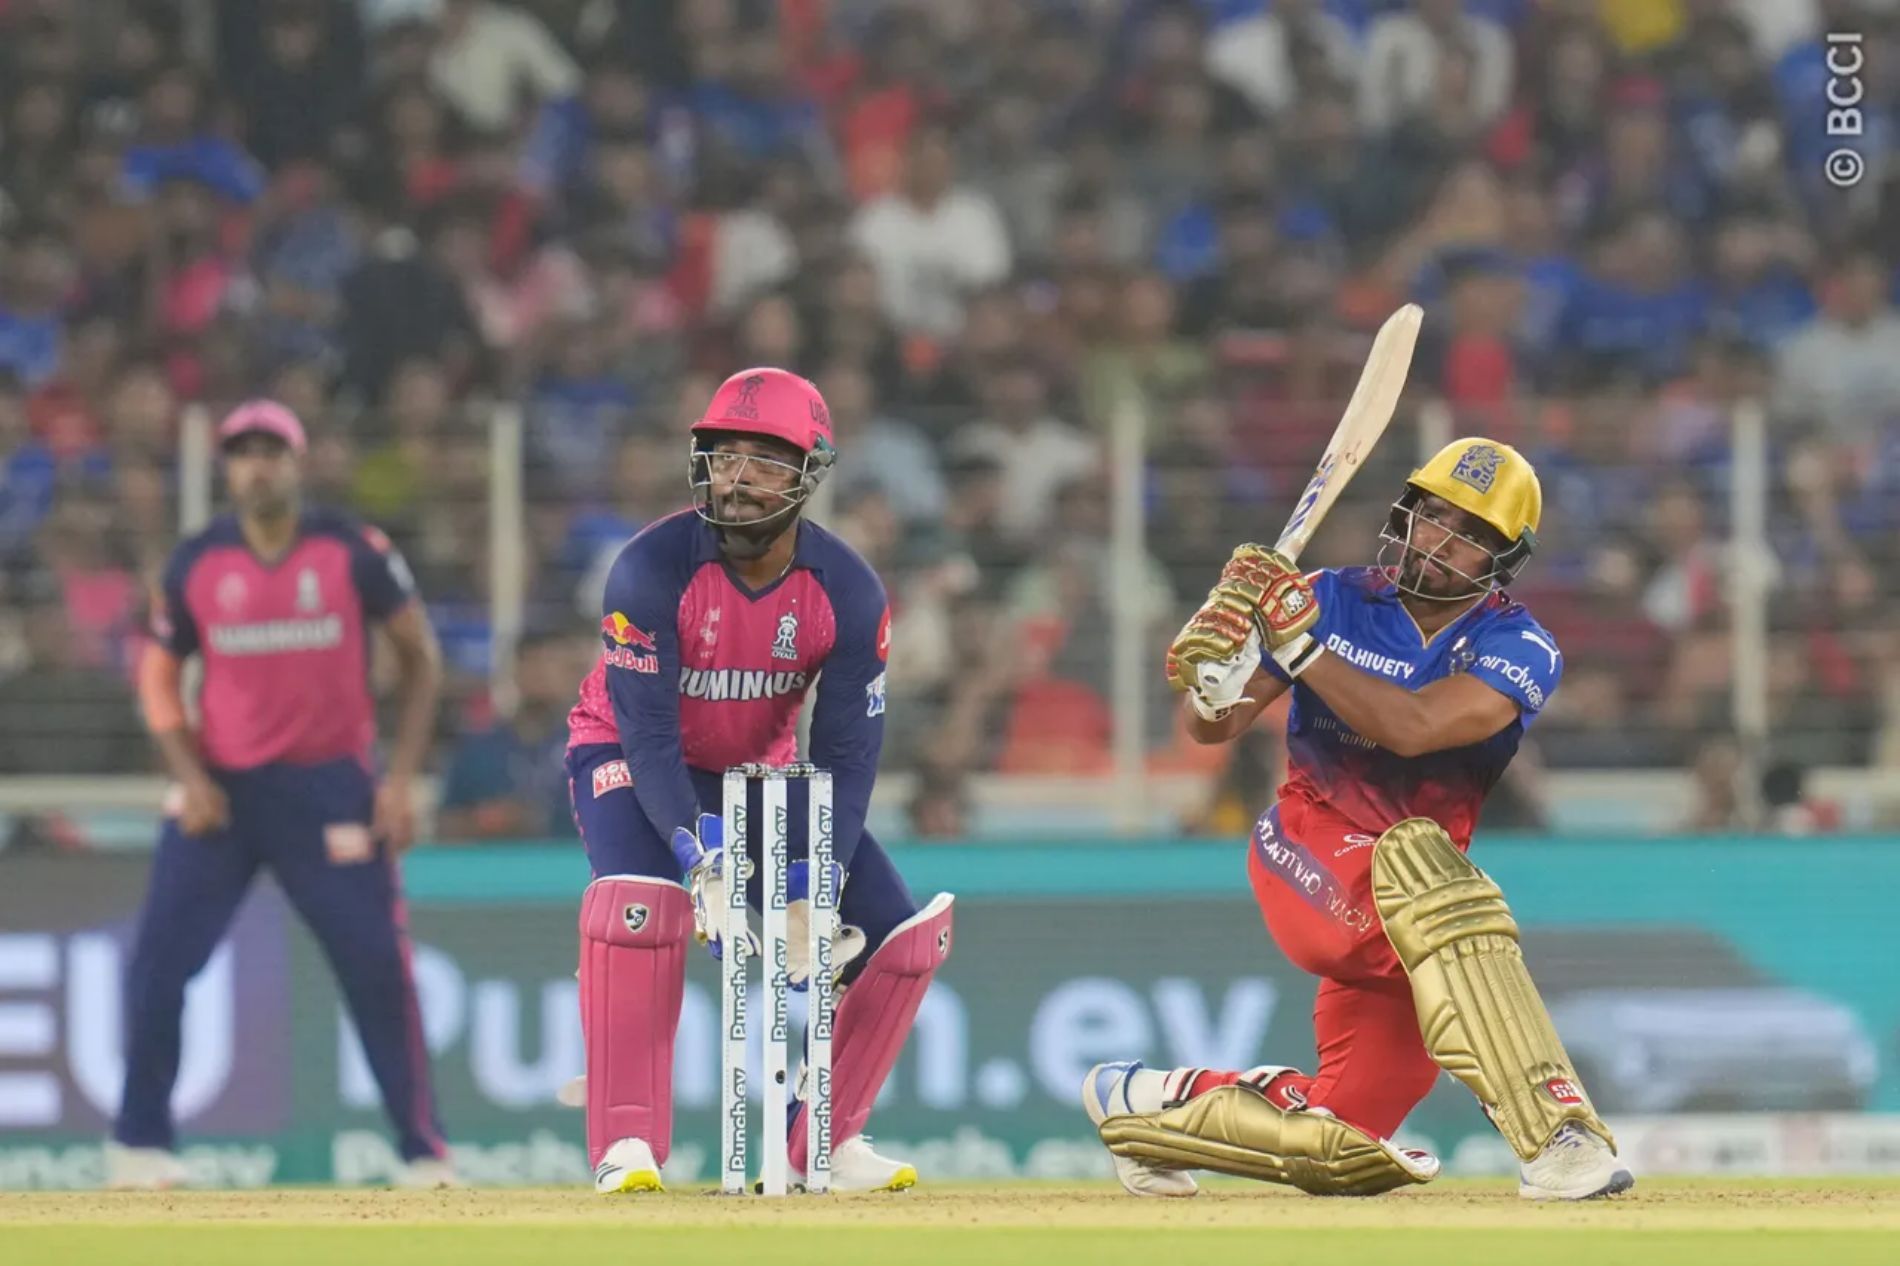 Mahipal Lomror chipped in with a handy knock. (Image Credit: BCCI/ iplt20.com)